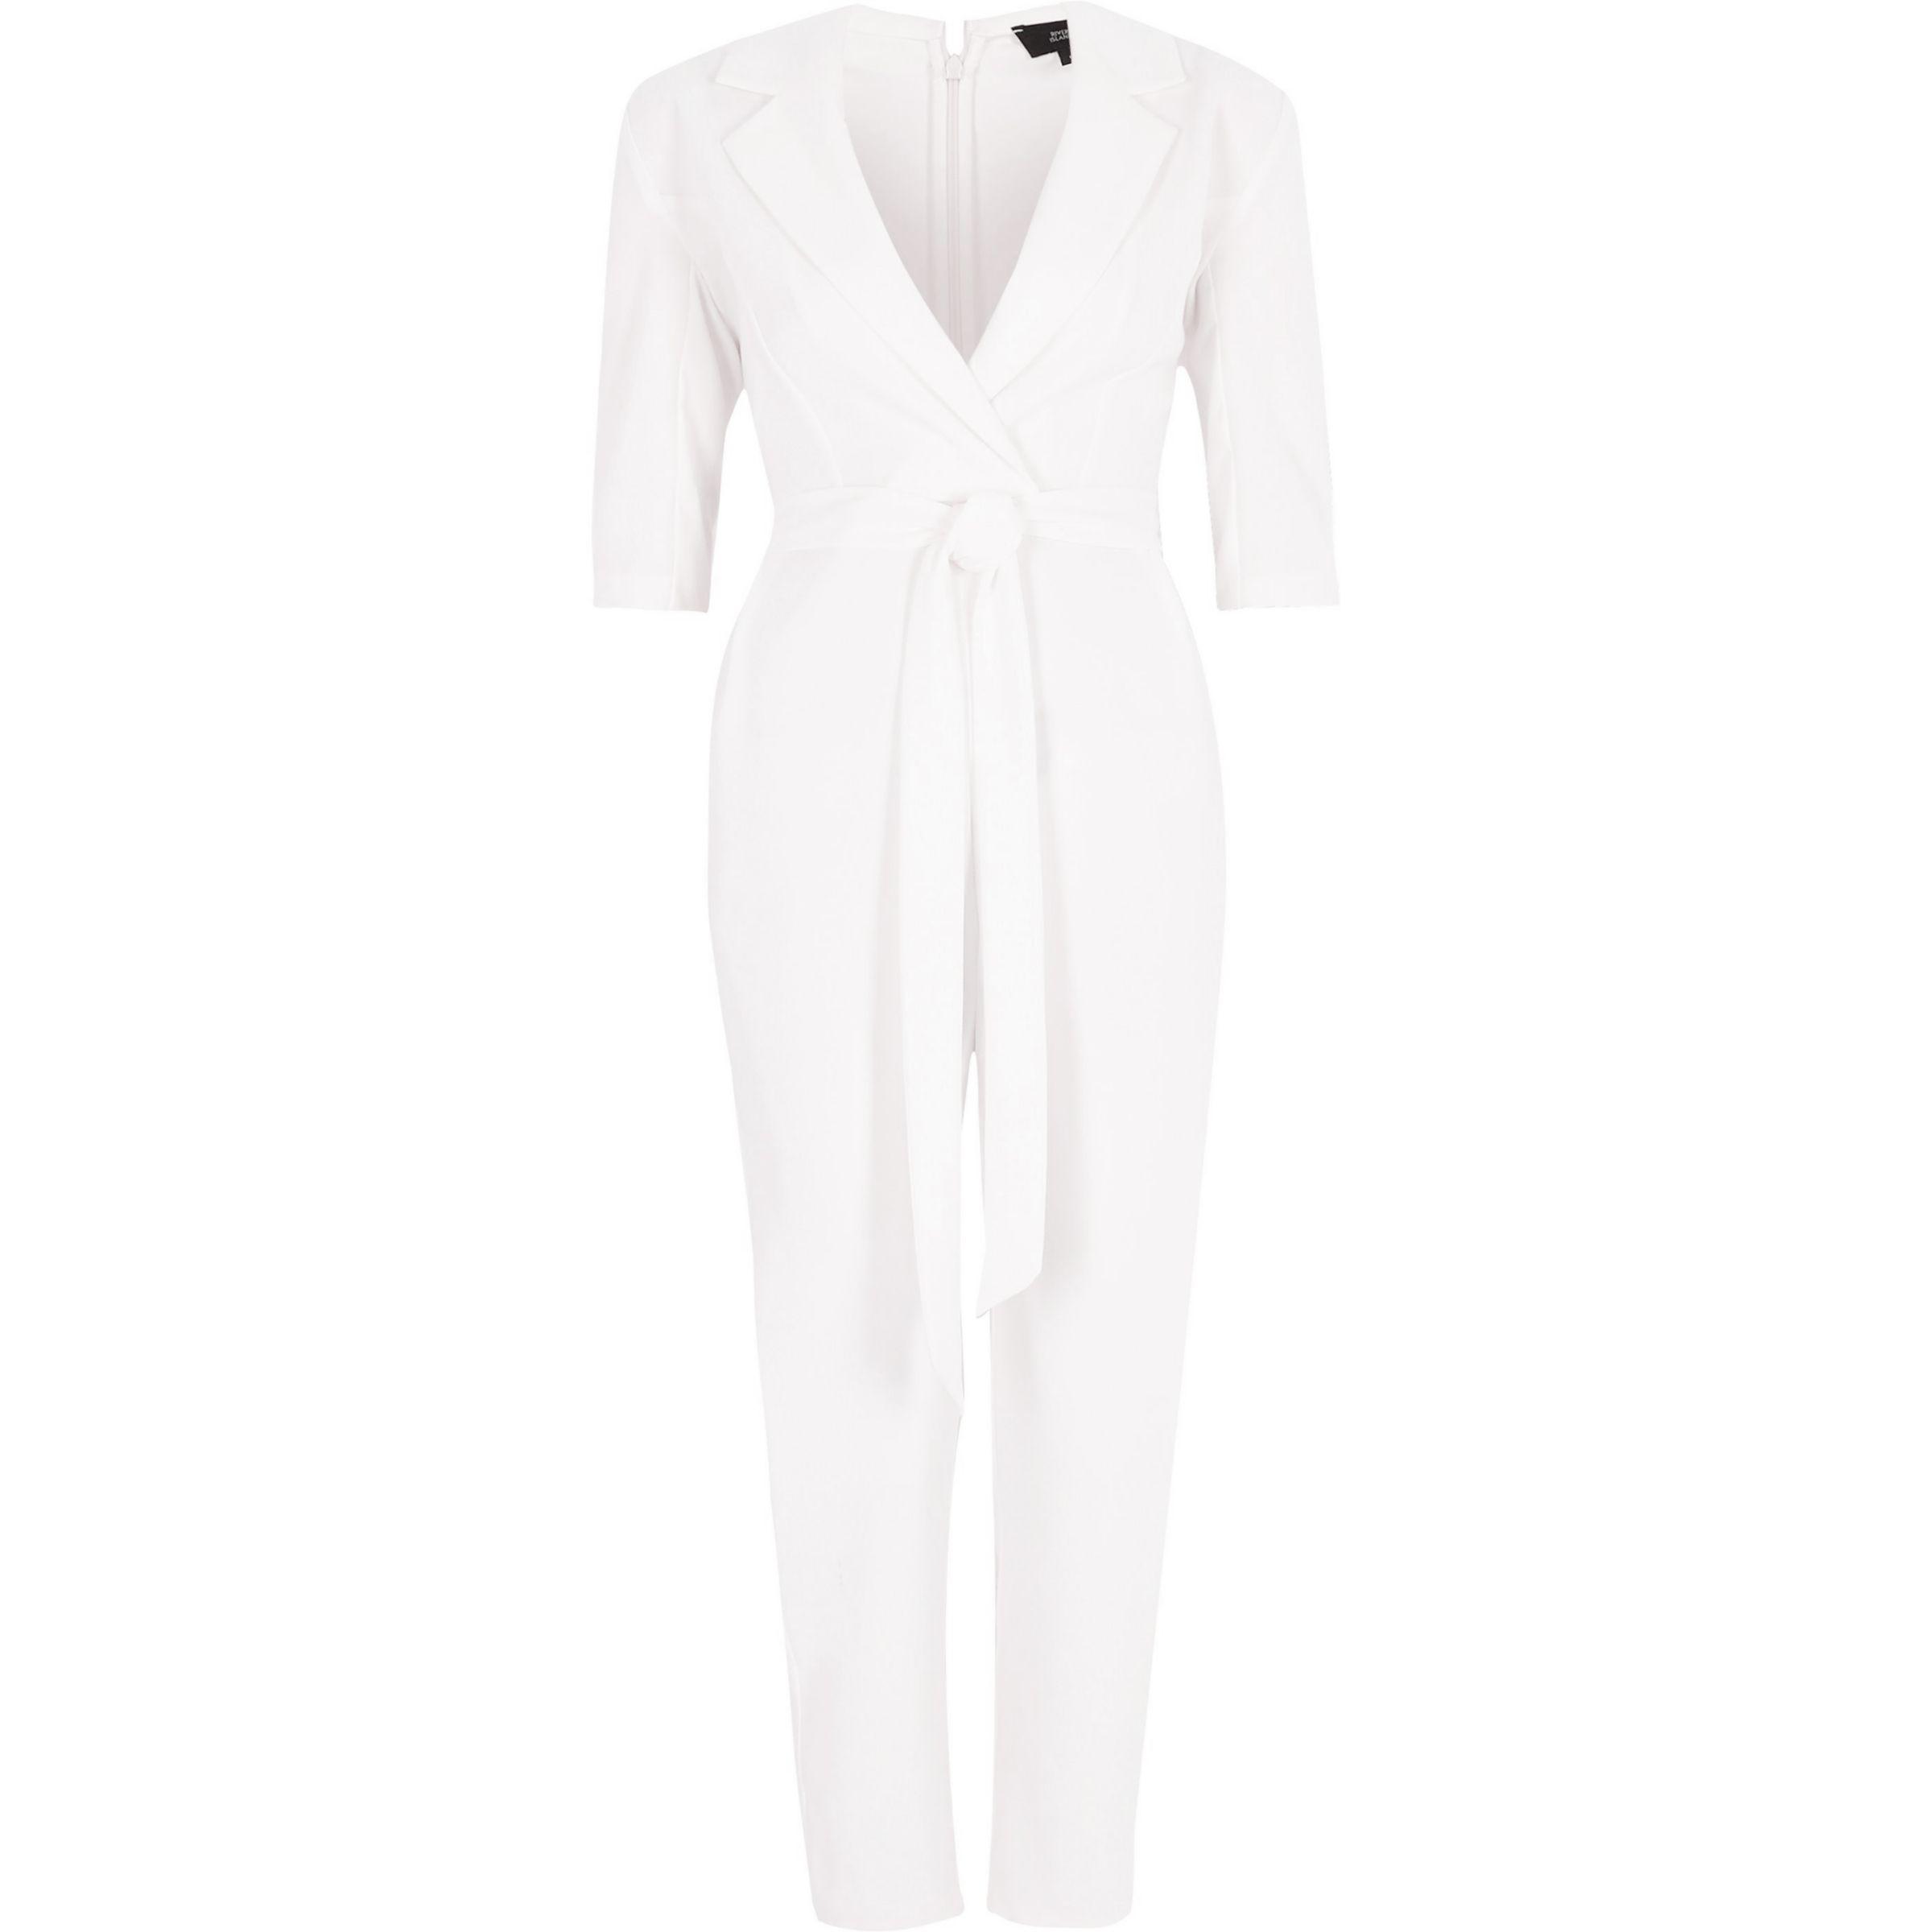 Lyst - River Island White Three Quarter Sleeve Tailored Jumpsuit in White